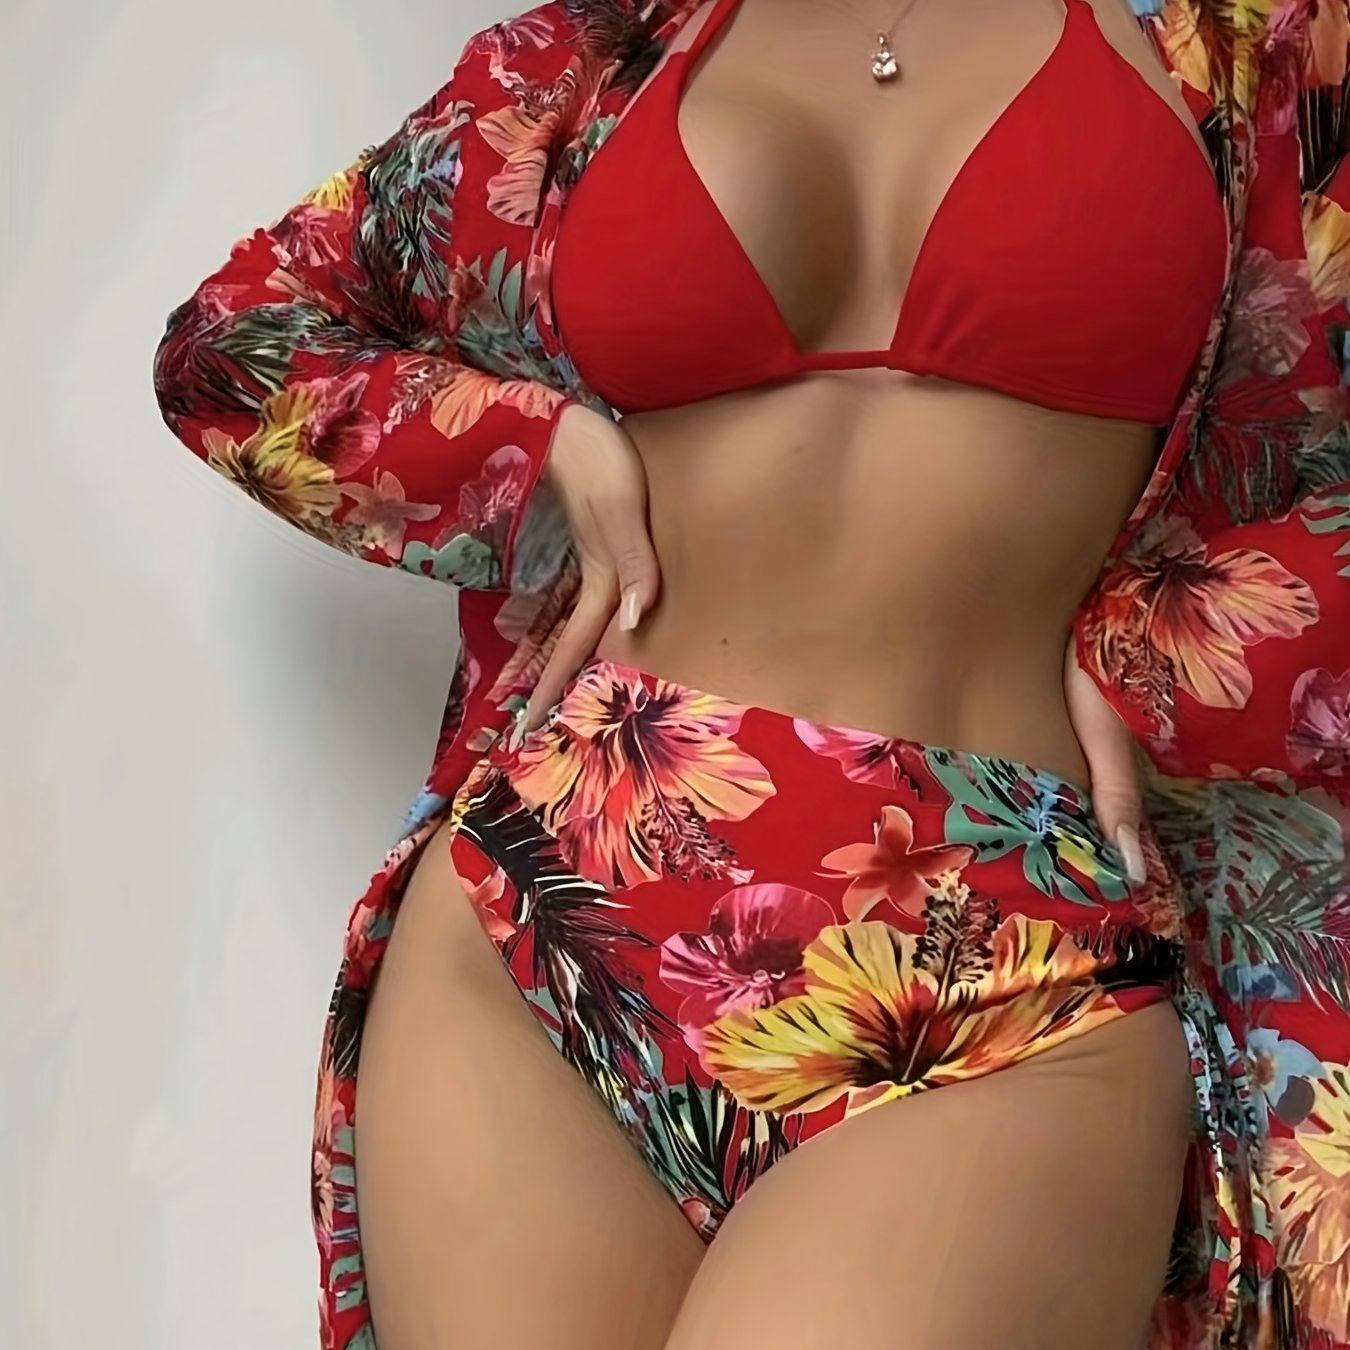 Vzyzv 3-Pieces Tropical Print Bikini Sets, Halter Neck Tie Back Tie Side High Cut With Cover Up Shirt Swimsuit, Women's Swimwear & Clothing